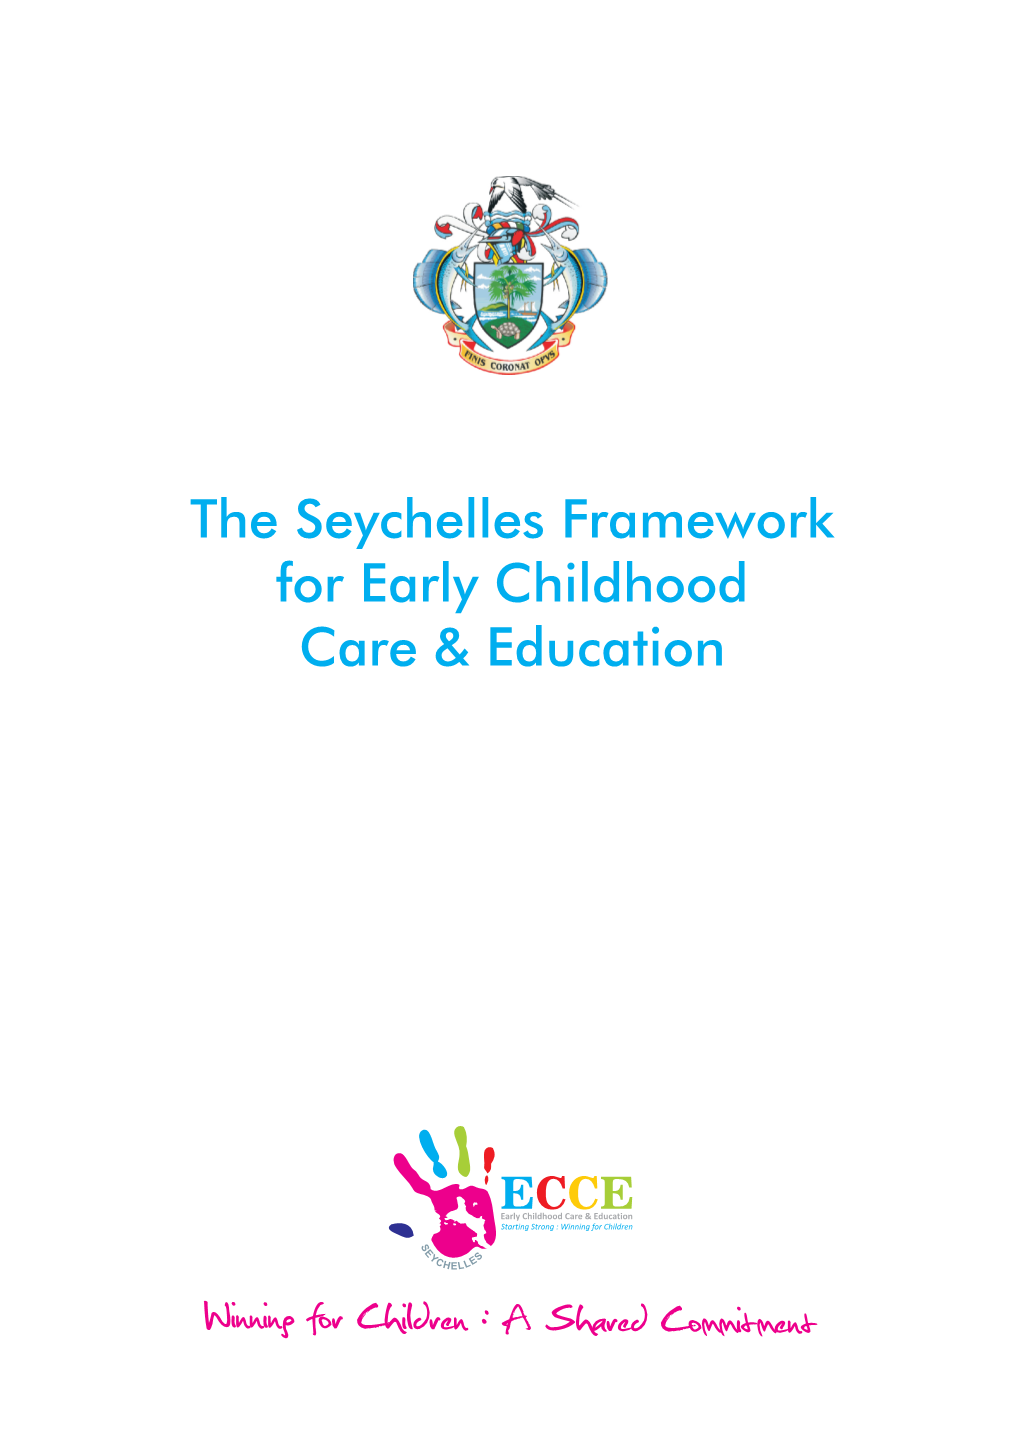 The Seychelles Framework for Early Childhood Care & Education